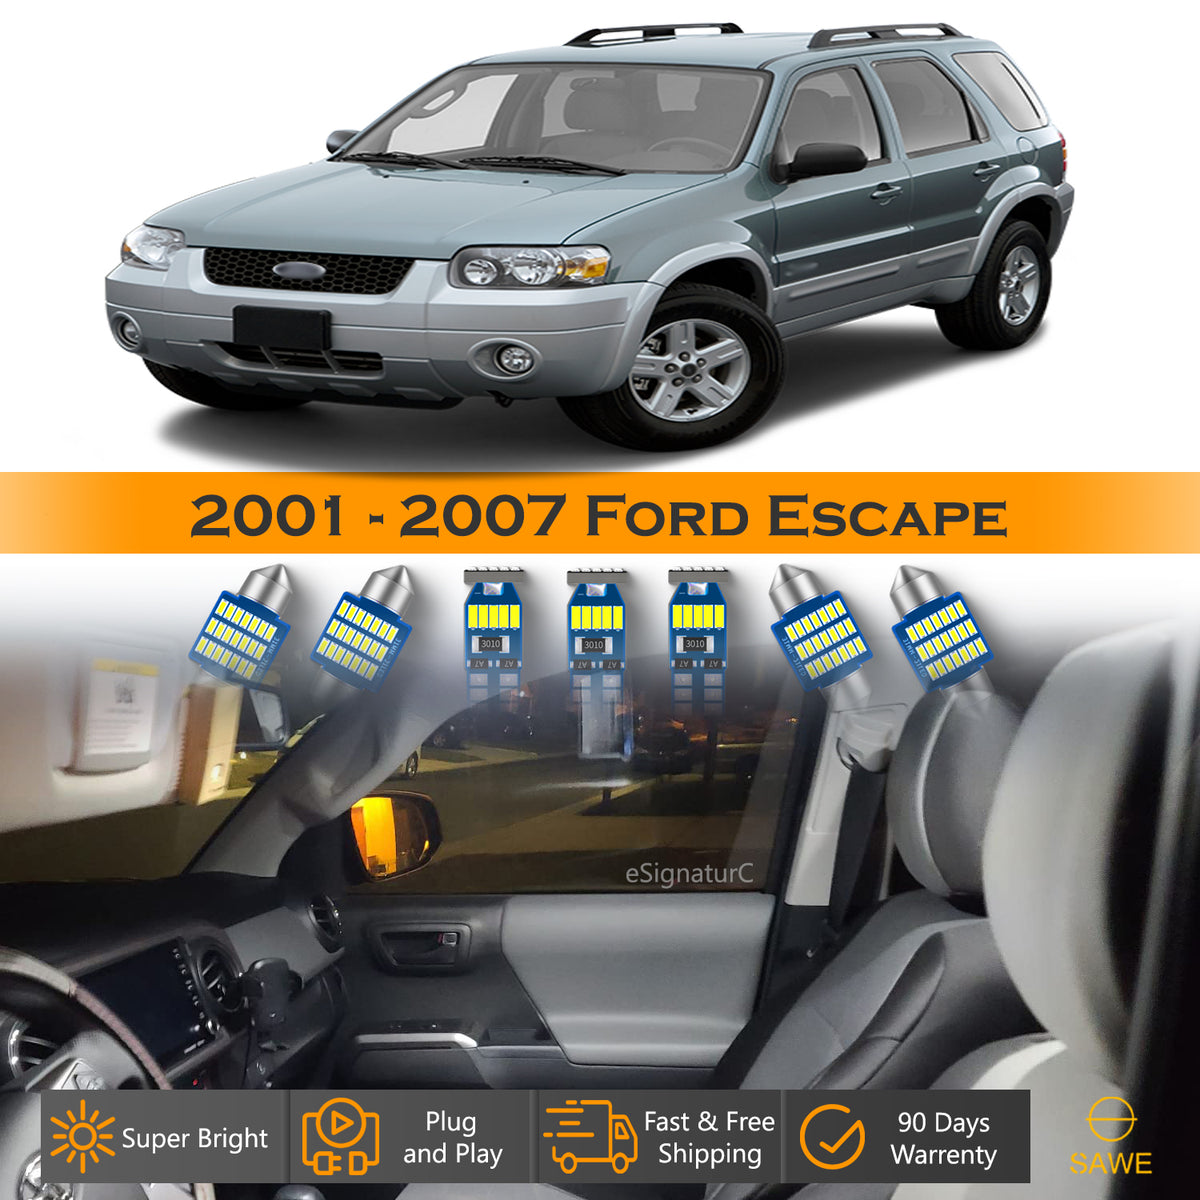 For Ford Escape Interior LED Lights - Dome & Map Light Bulbs Package Kit for 2001 - 2007 - White